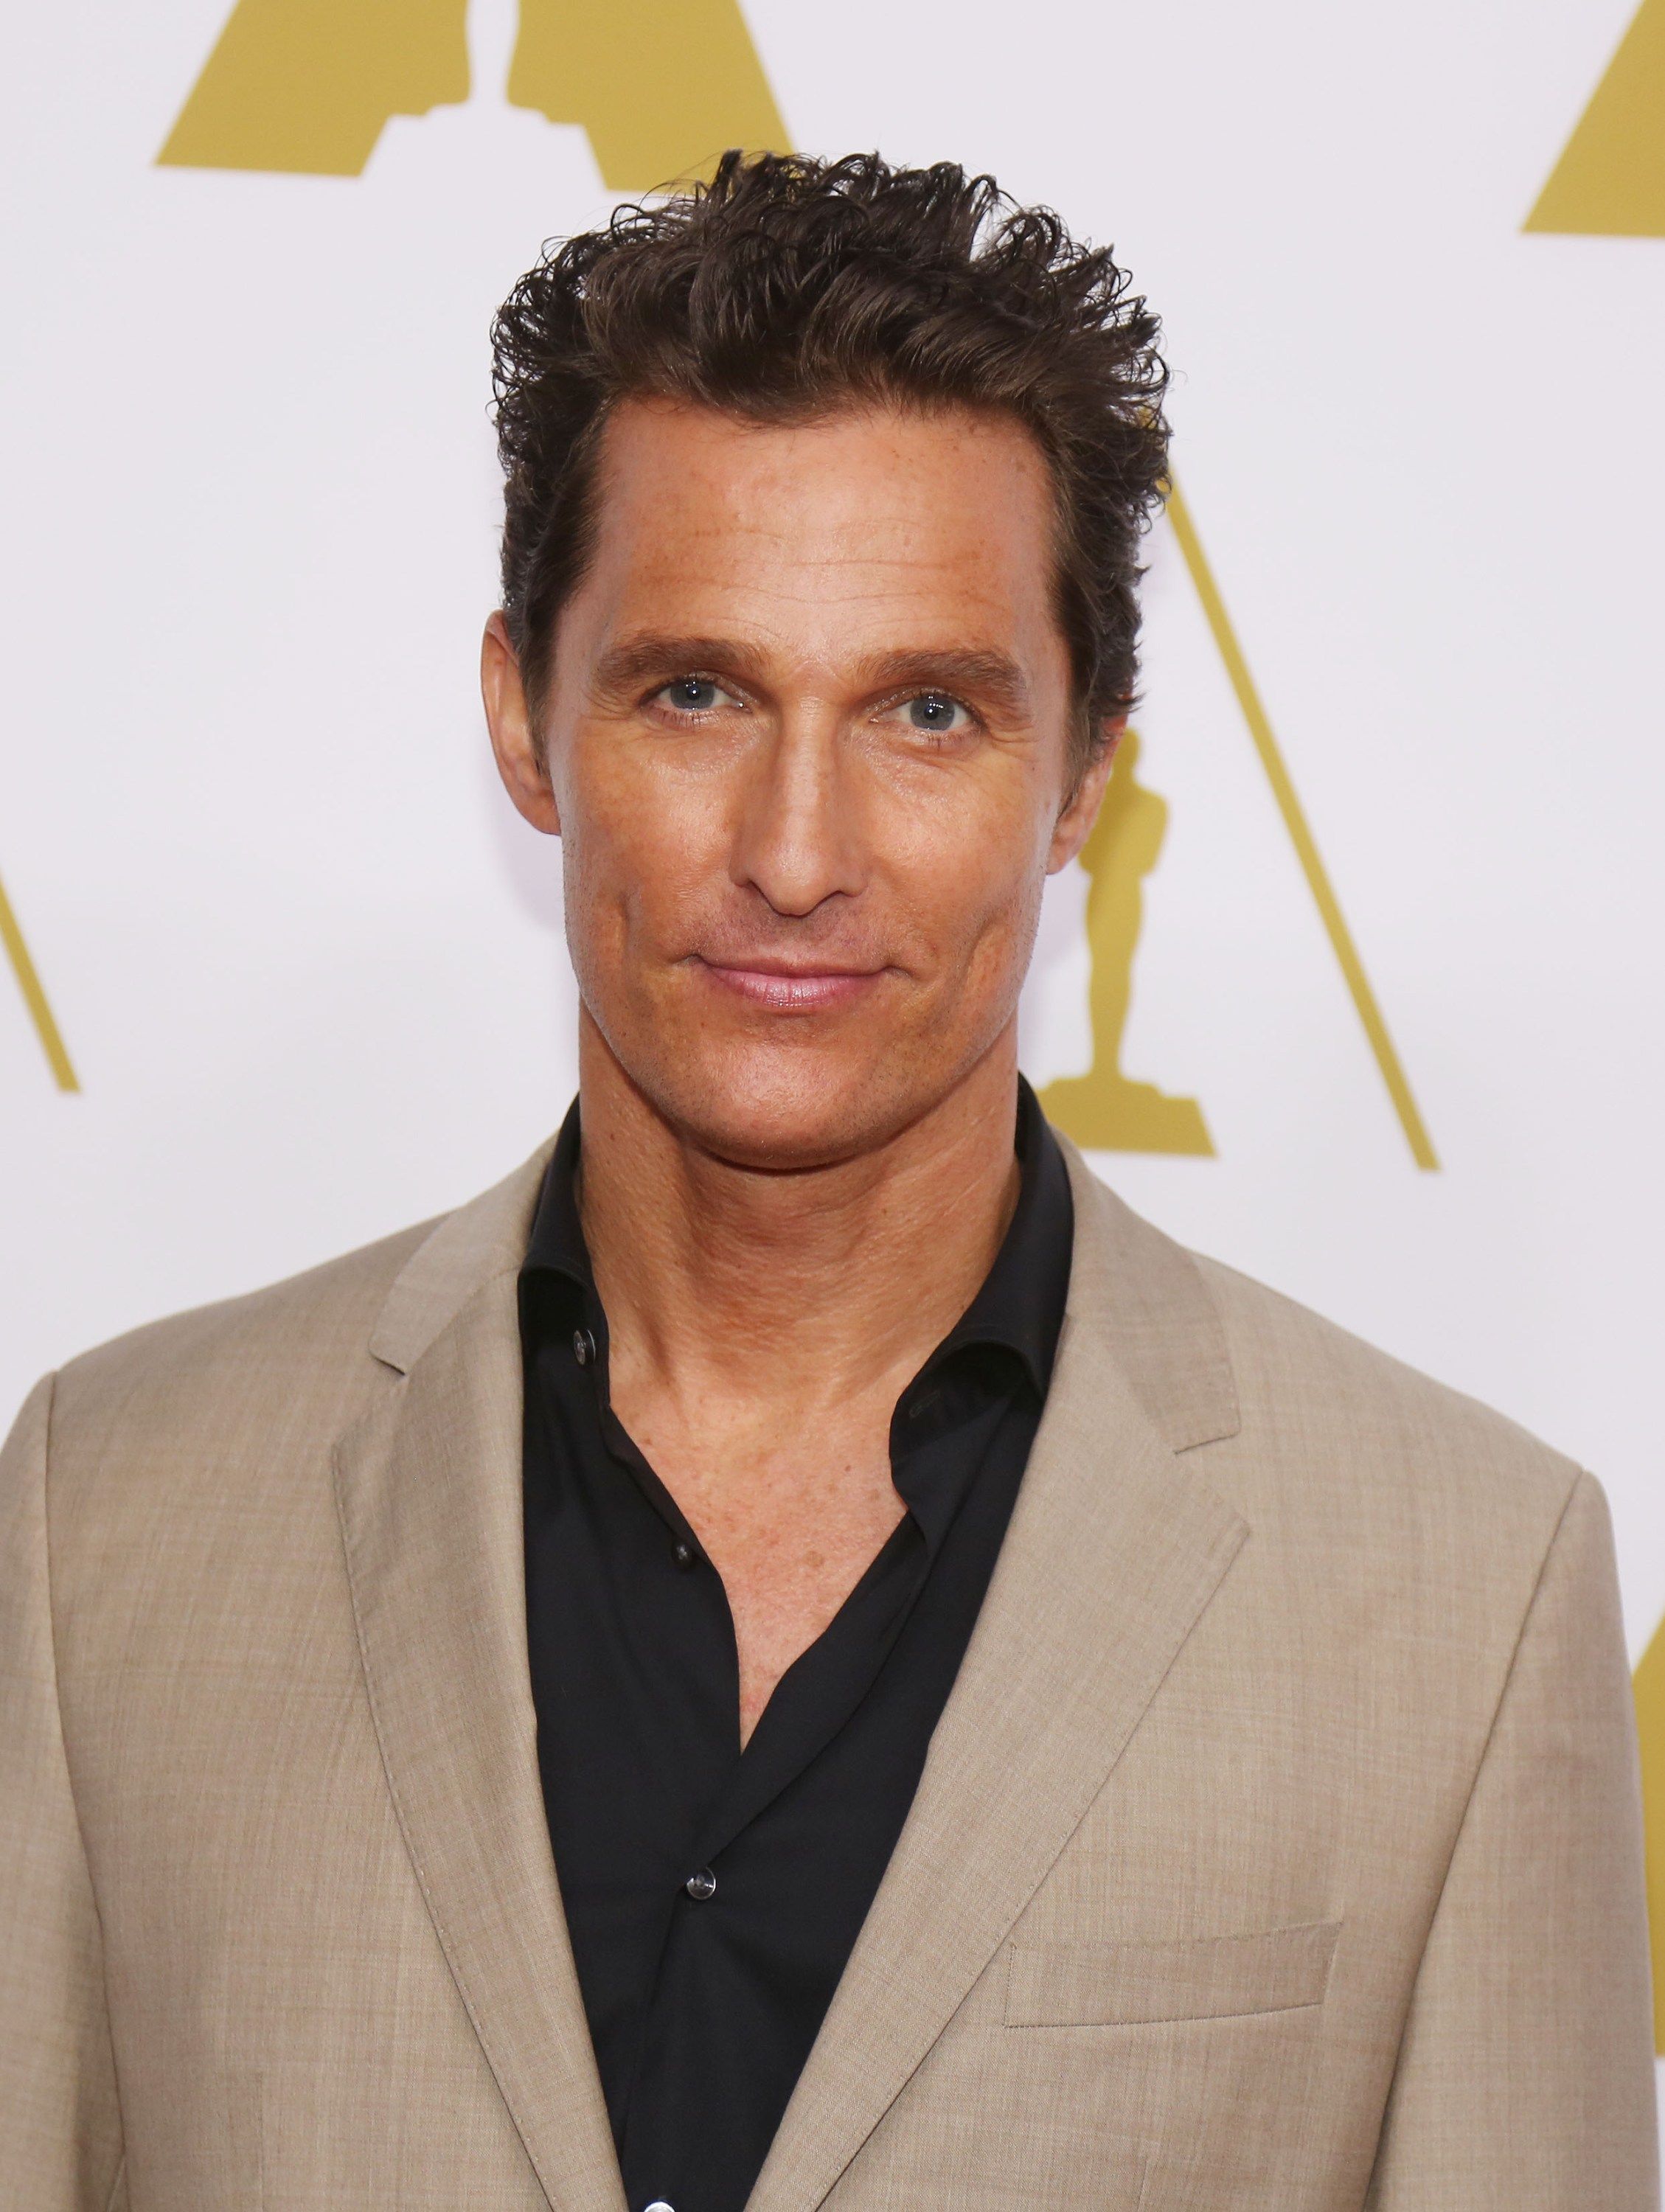 Matthew McConaughey at Annual Oscars Nominees Luncheon Red Carpet 2014 - Beverly Hills, CA